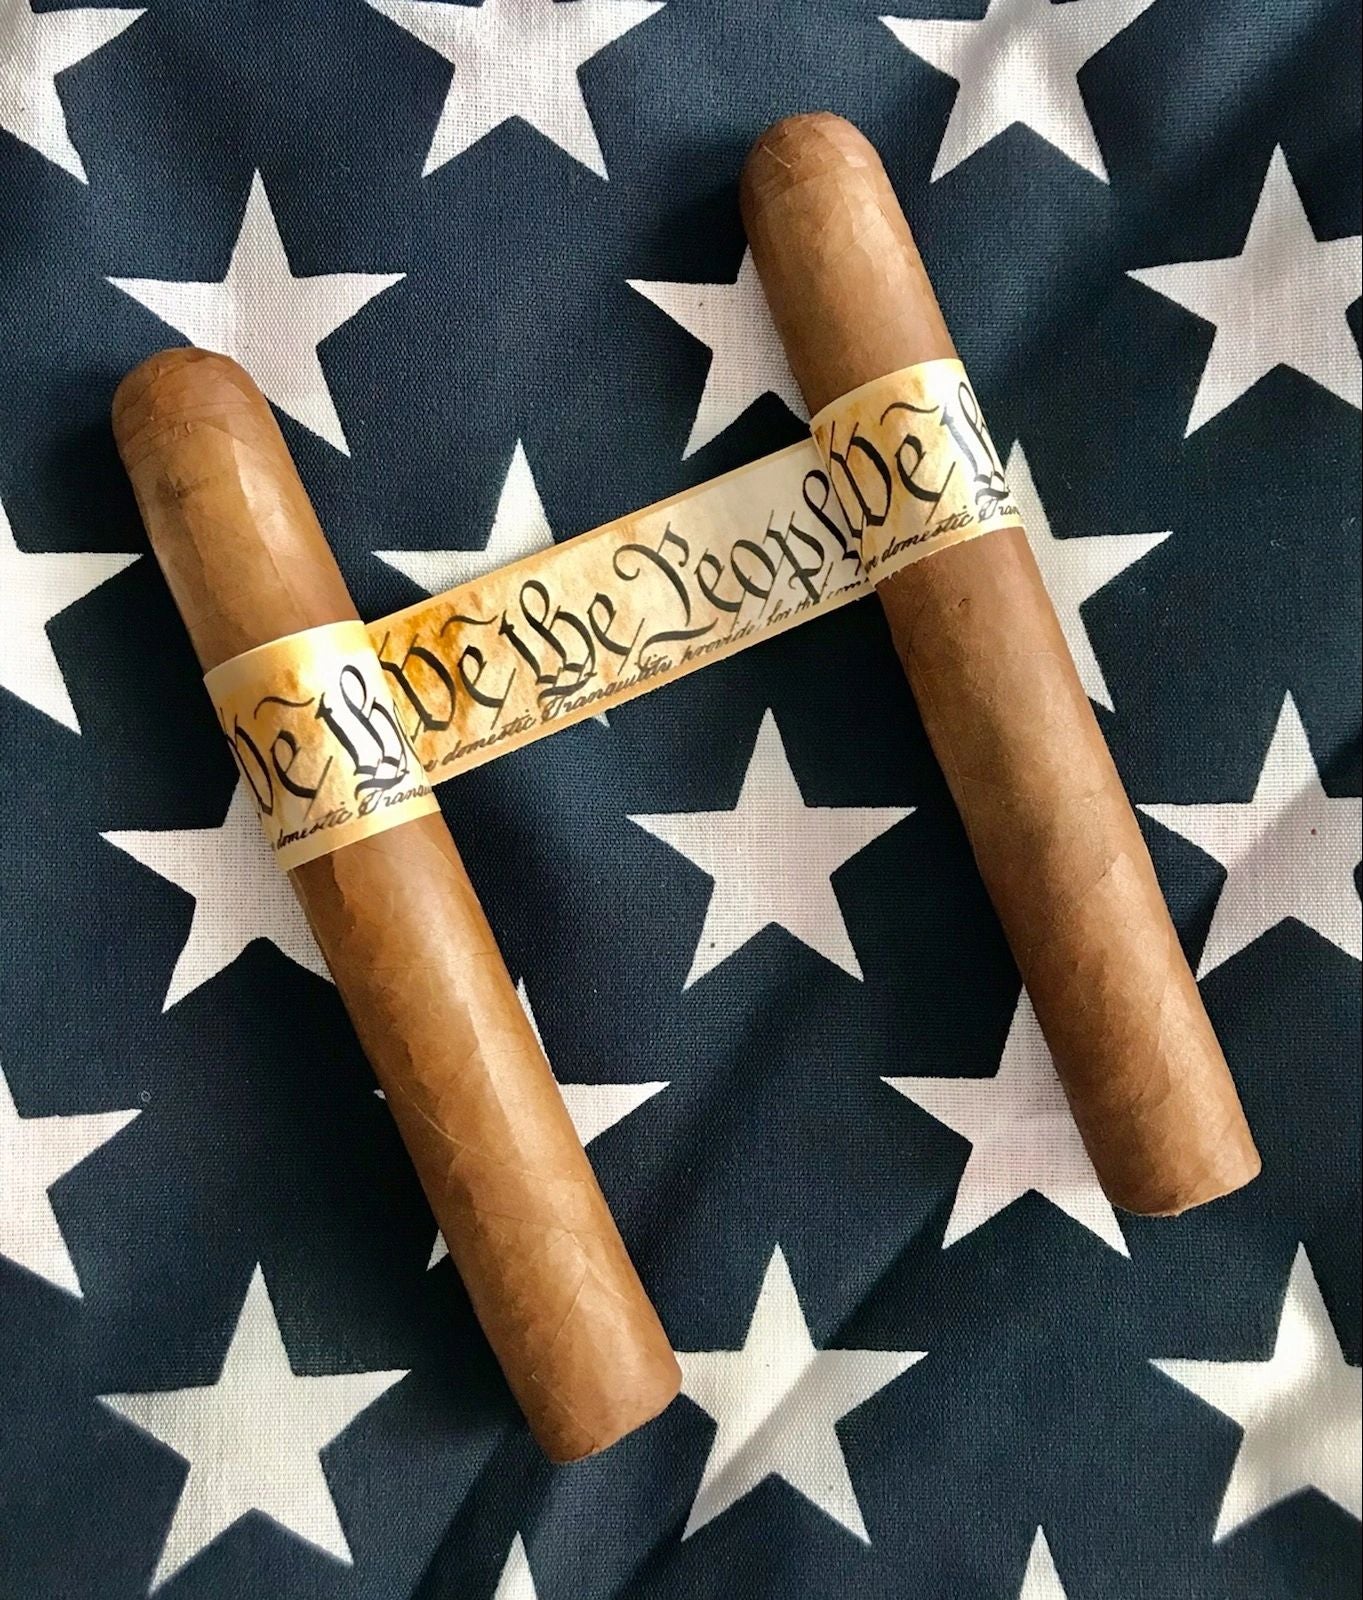 The Deployment We the People Cigar